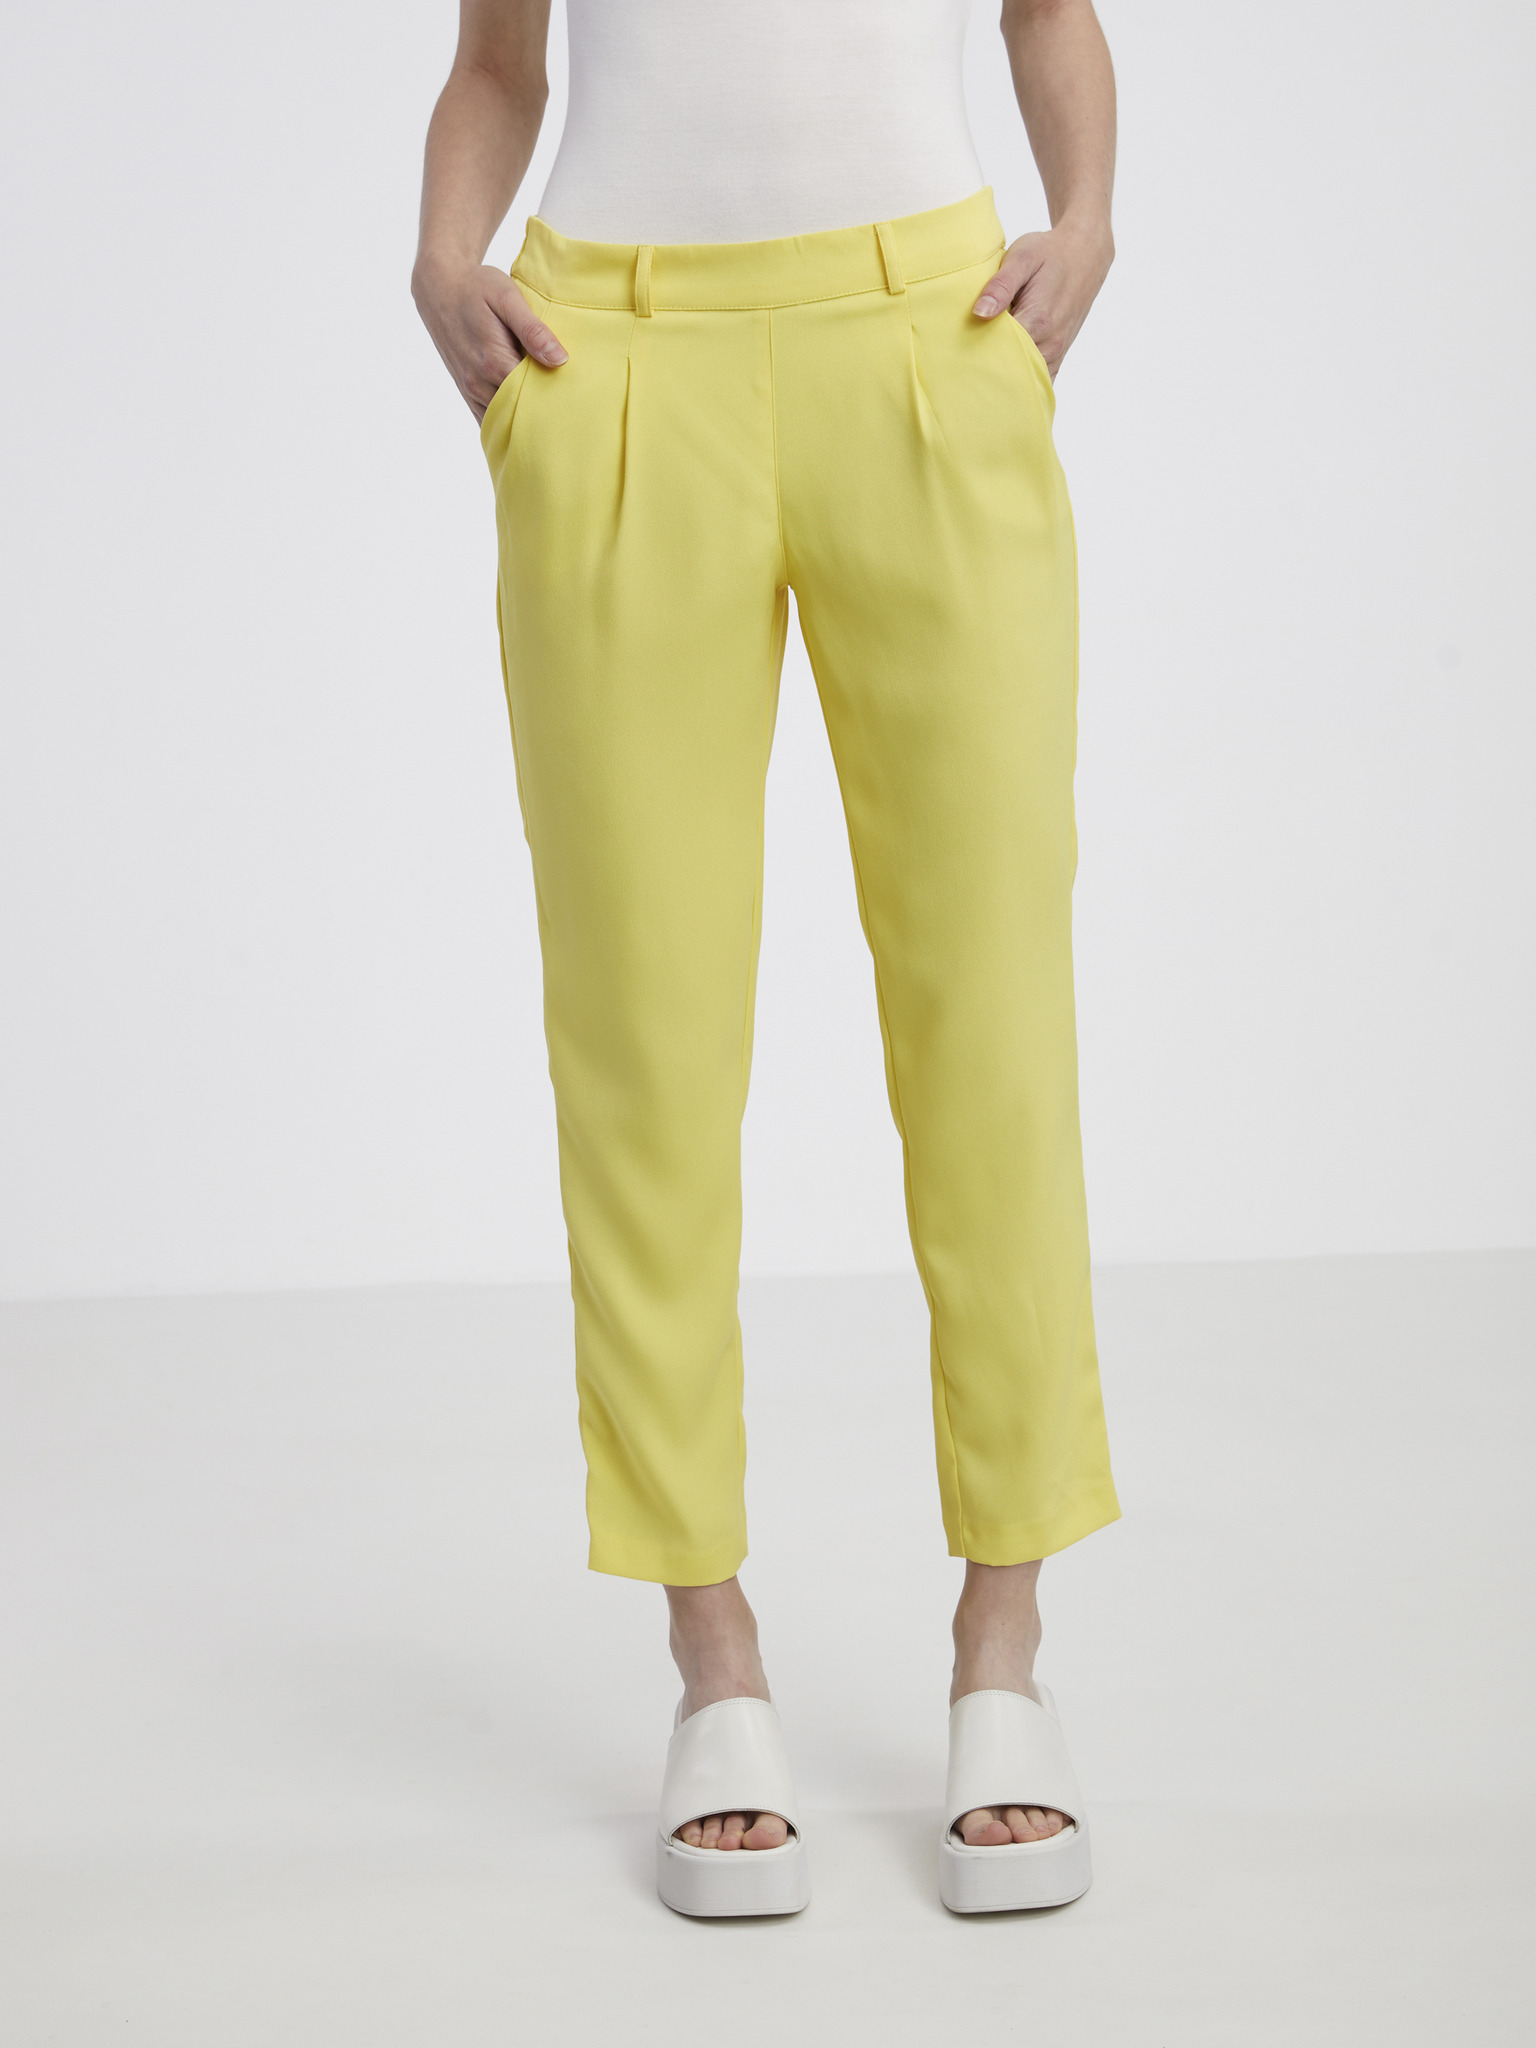 Mya Yellow Tailored Trousers | Sale | Collections | L.K.Bennett, London